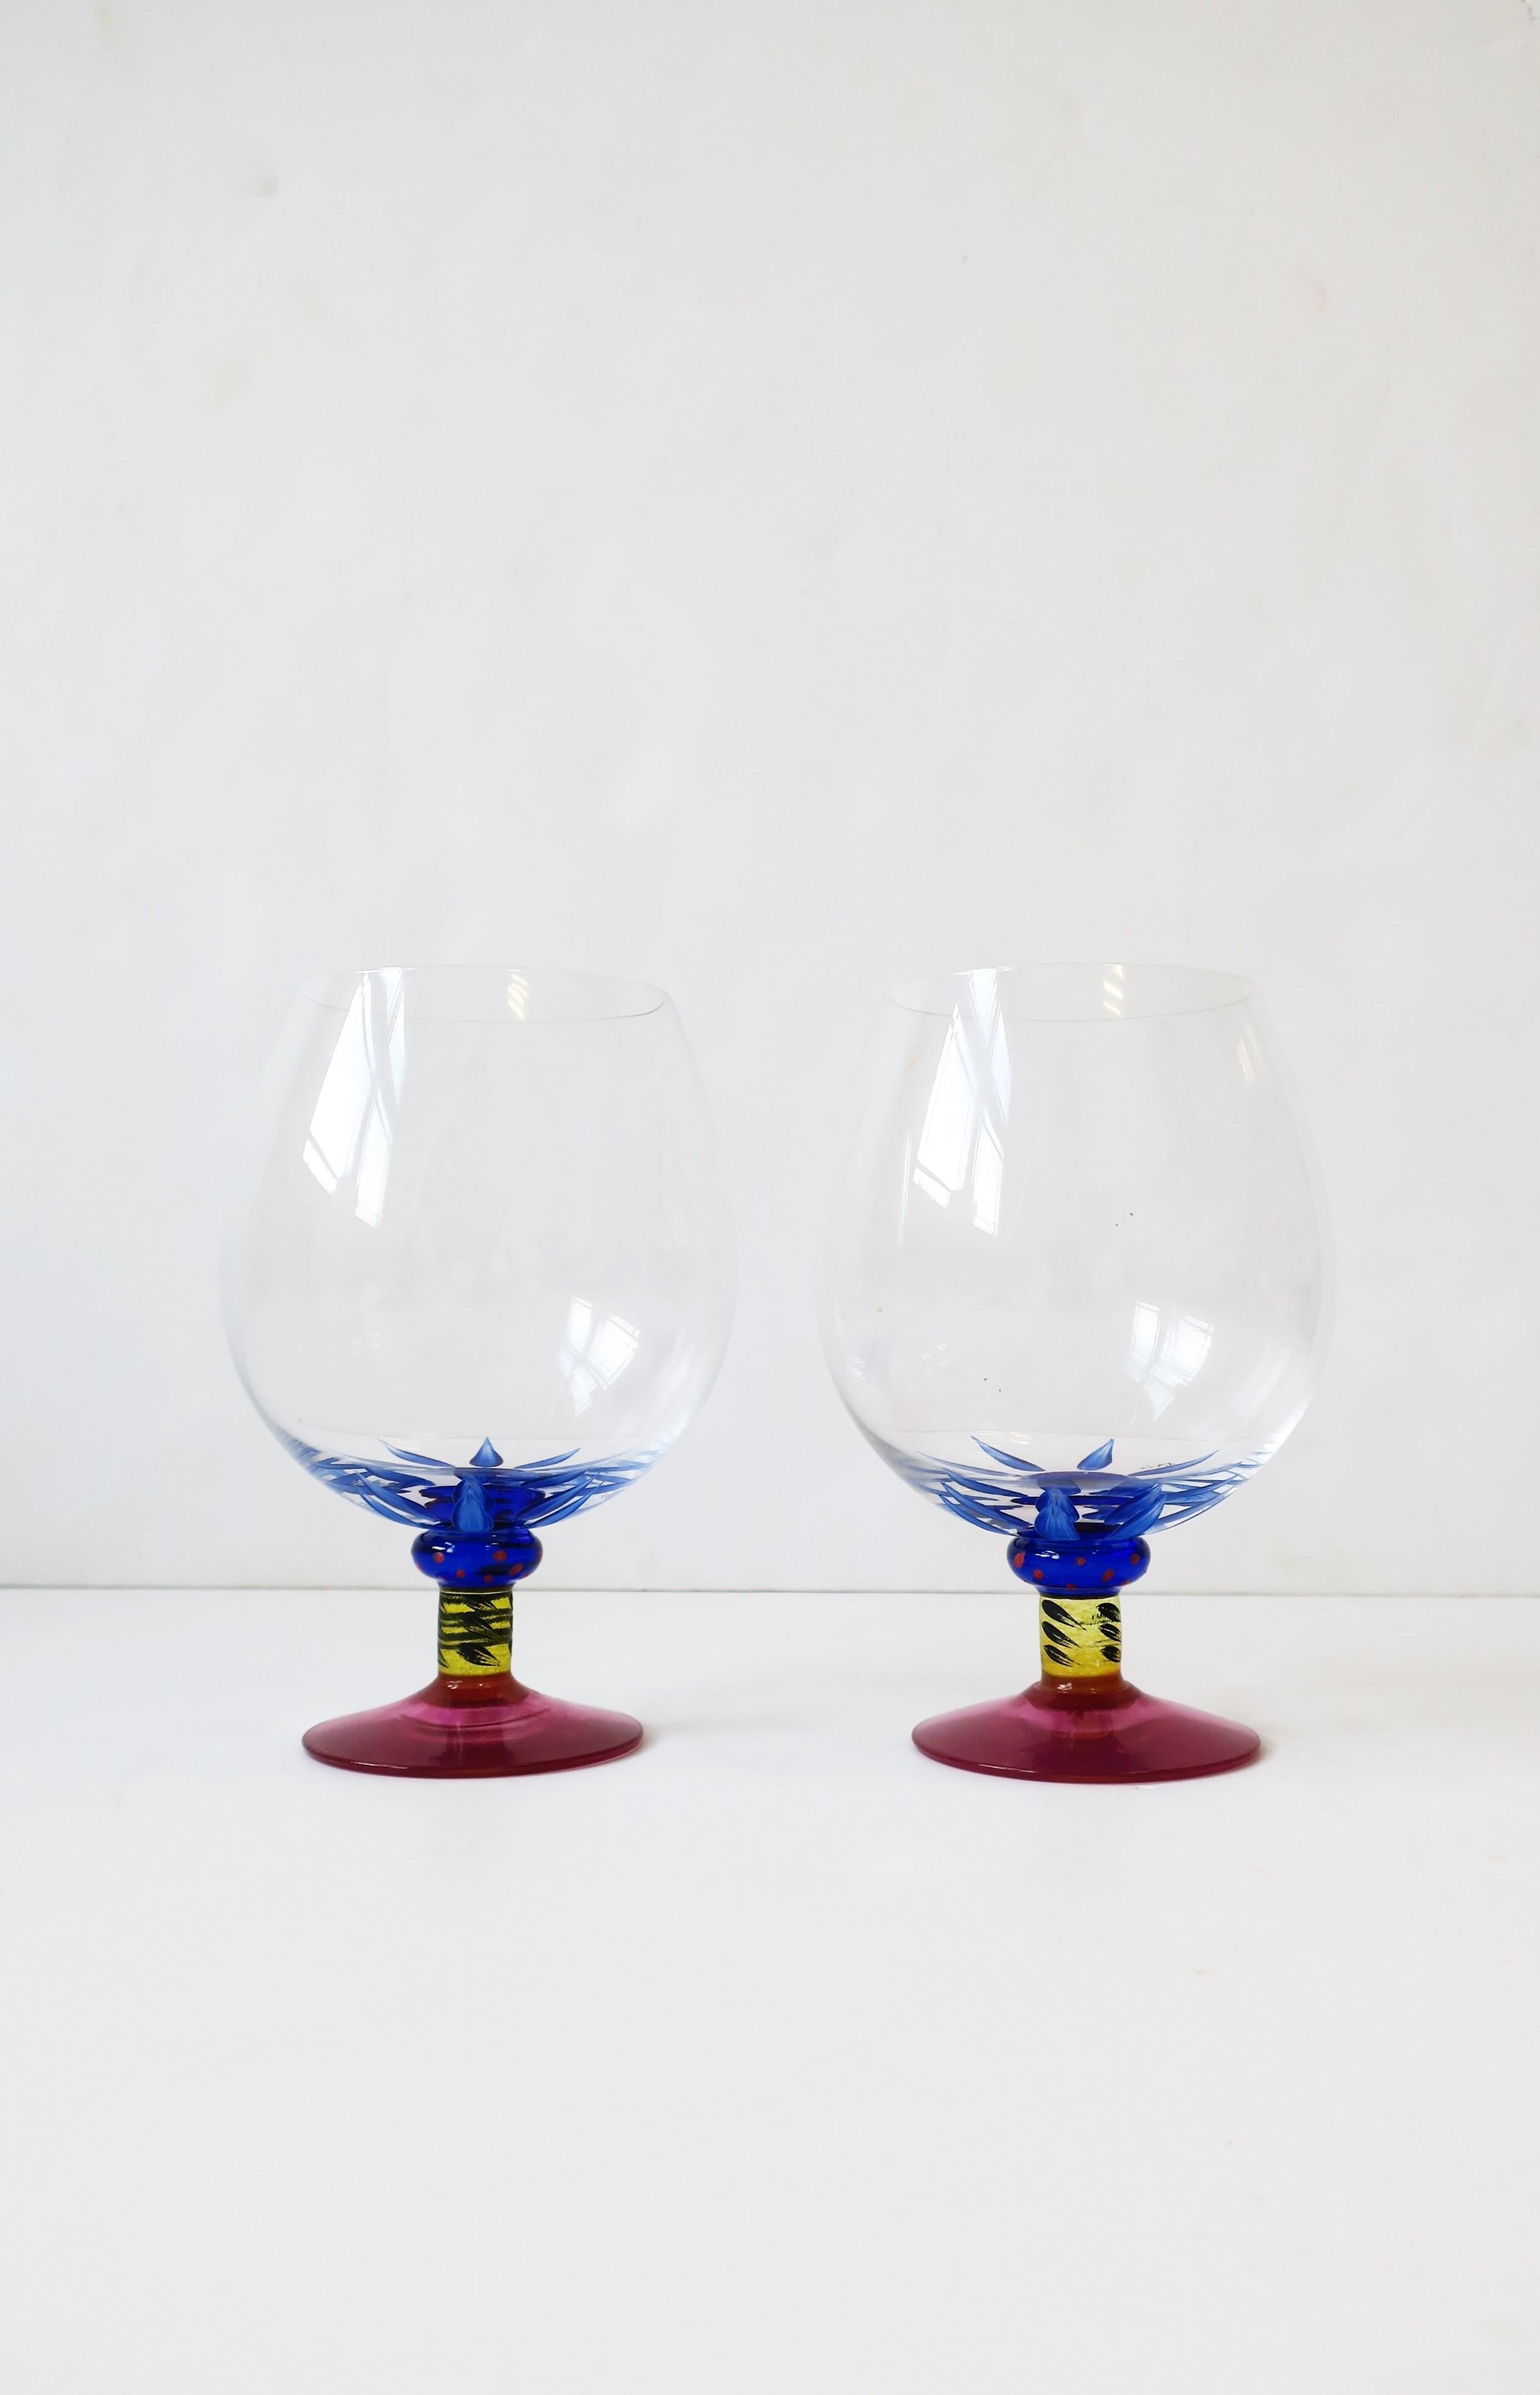 A beautiful pair of Postmodern art glass cocktail or brandy cognac liquor spirits glasses by Designer Ken Done for Kosta Boda, Sweden, circa 1990s. These beautiful crystal and art glass glasses are hand painted and hand blown; Base/stem is a cobalt